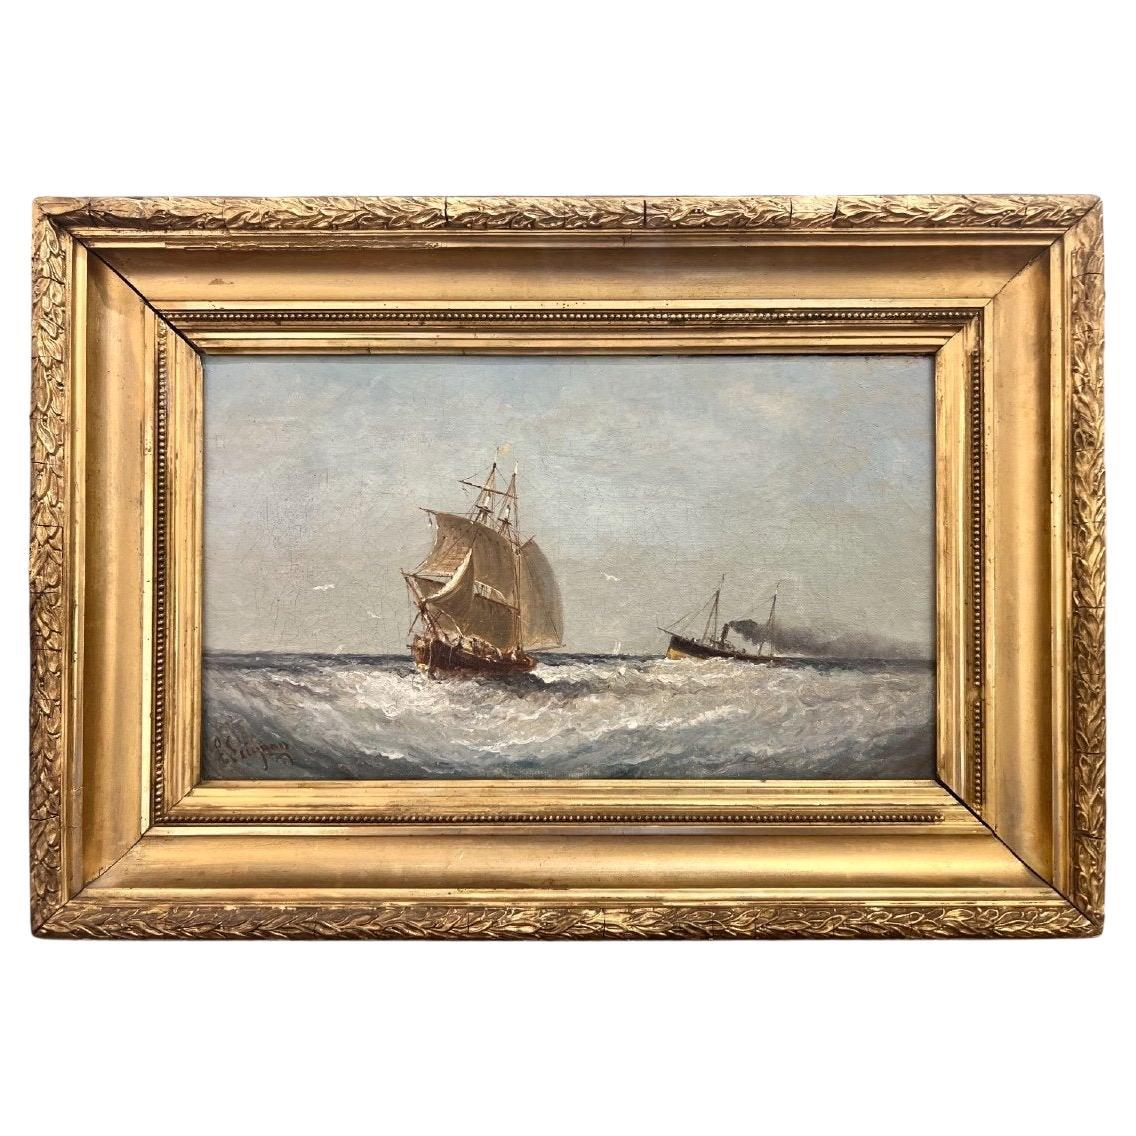 19th Century Marine Oil-on-Canvas Painting by Paul Seignon (1820-1890). 